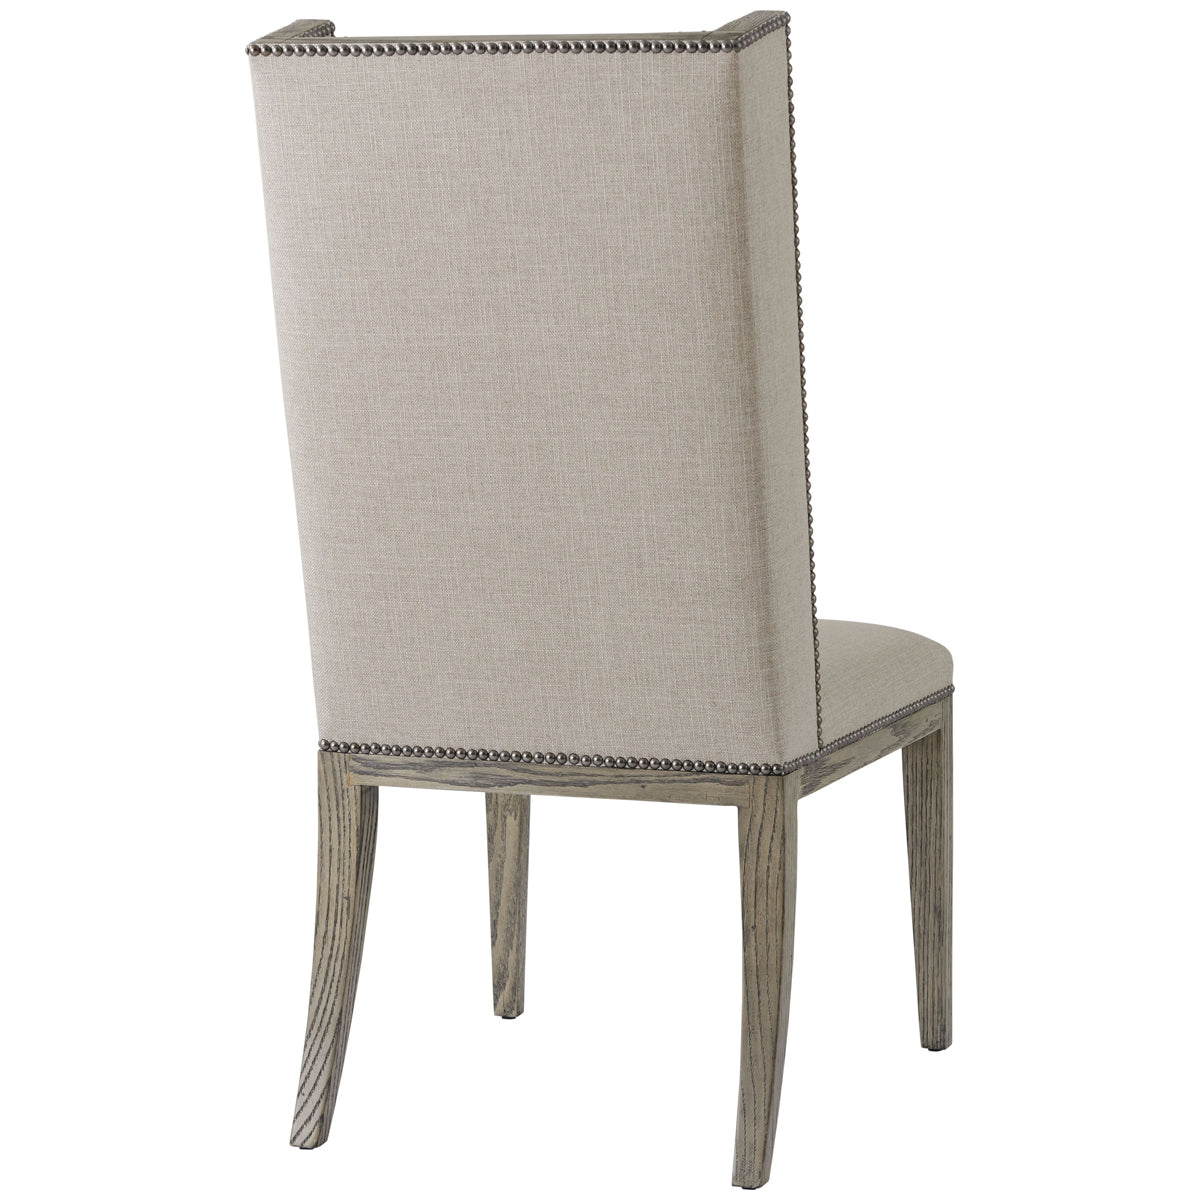 Theodore Alexander Aston Dining Chair, Set of 2